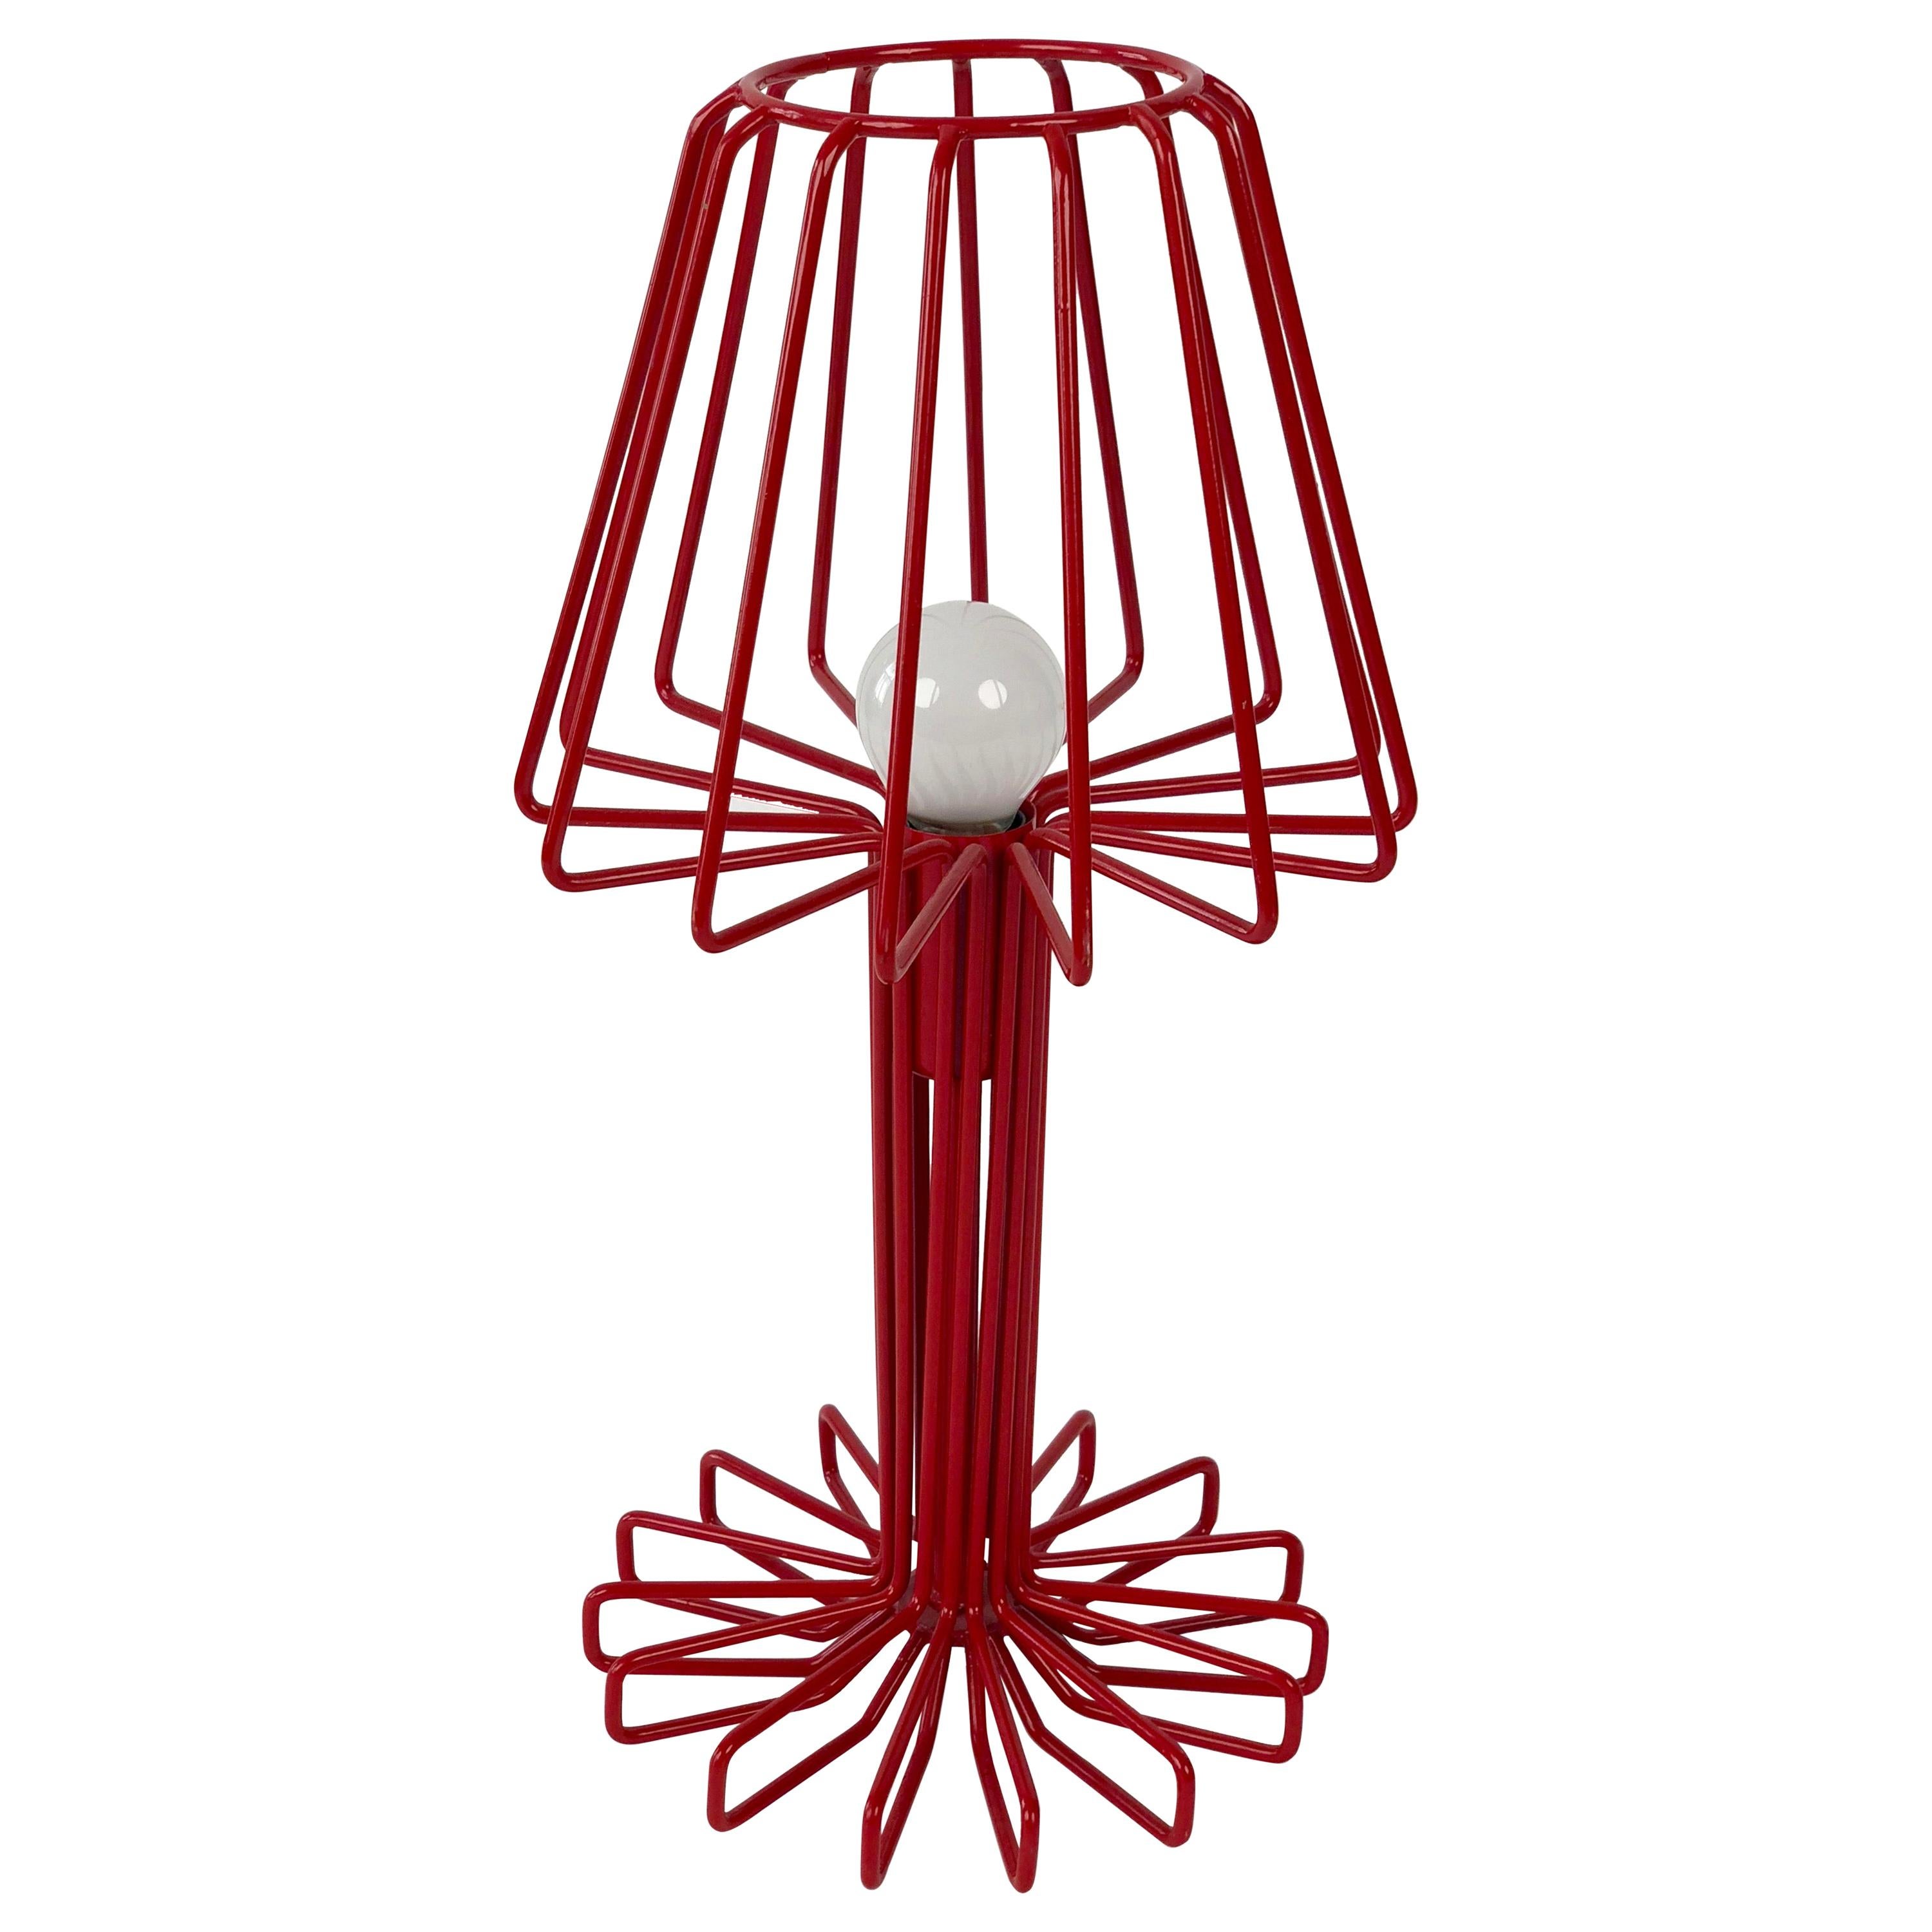 Small Italian Table Lamp in Red